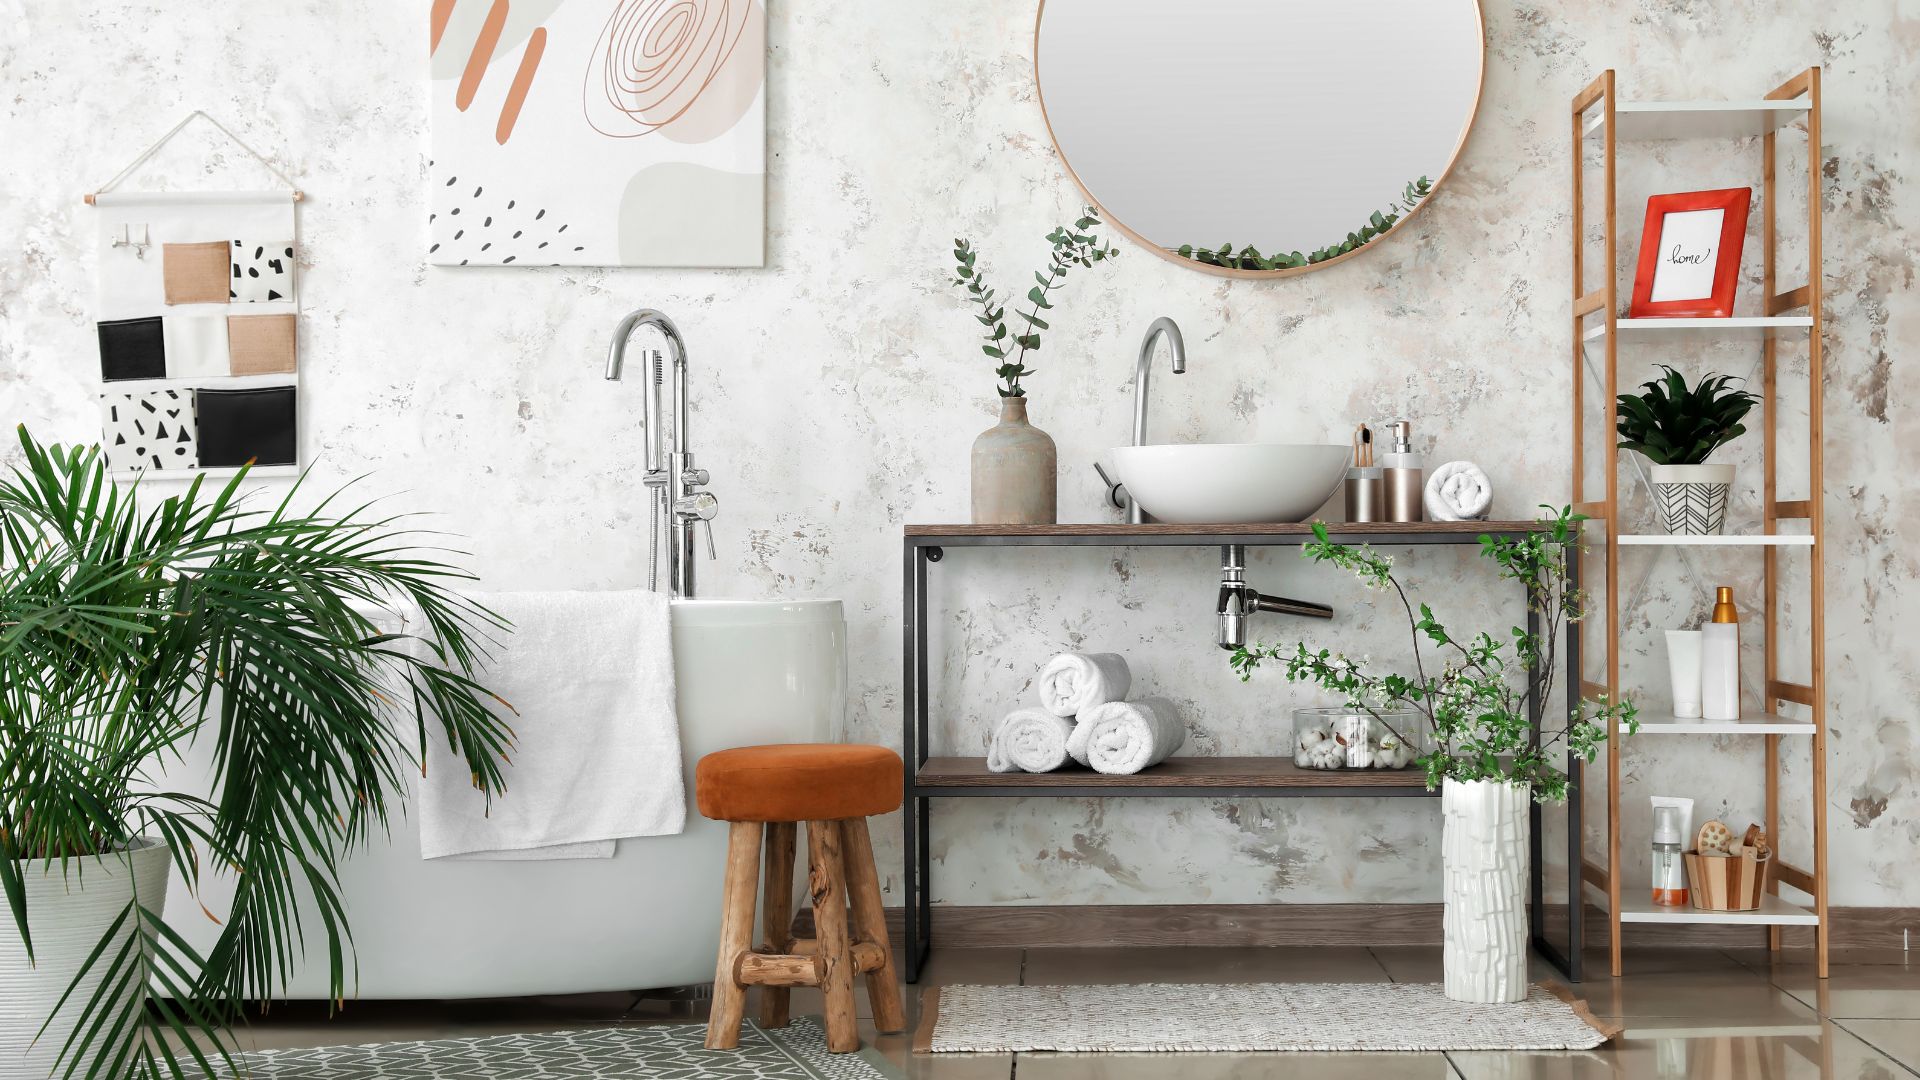 Bathroom with plants, and open shelving for storage